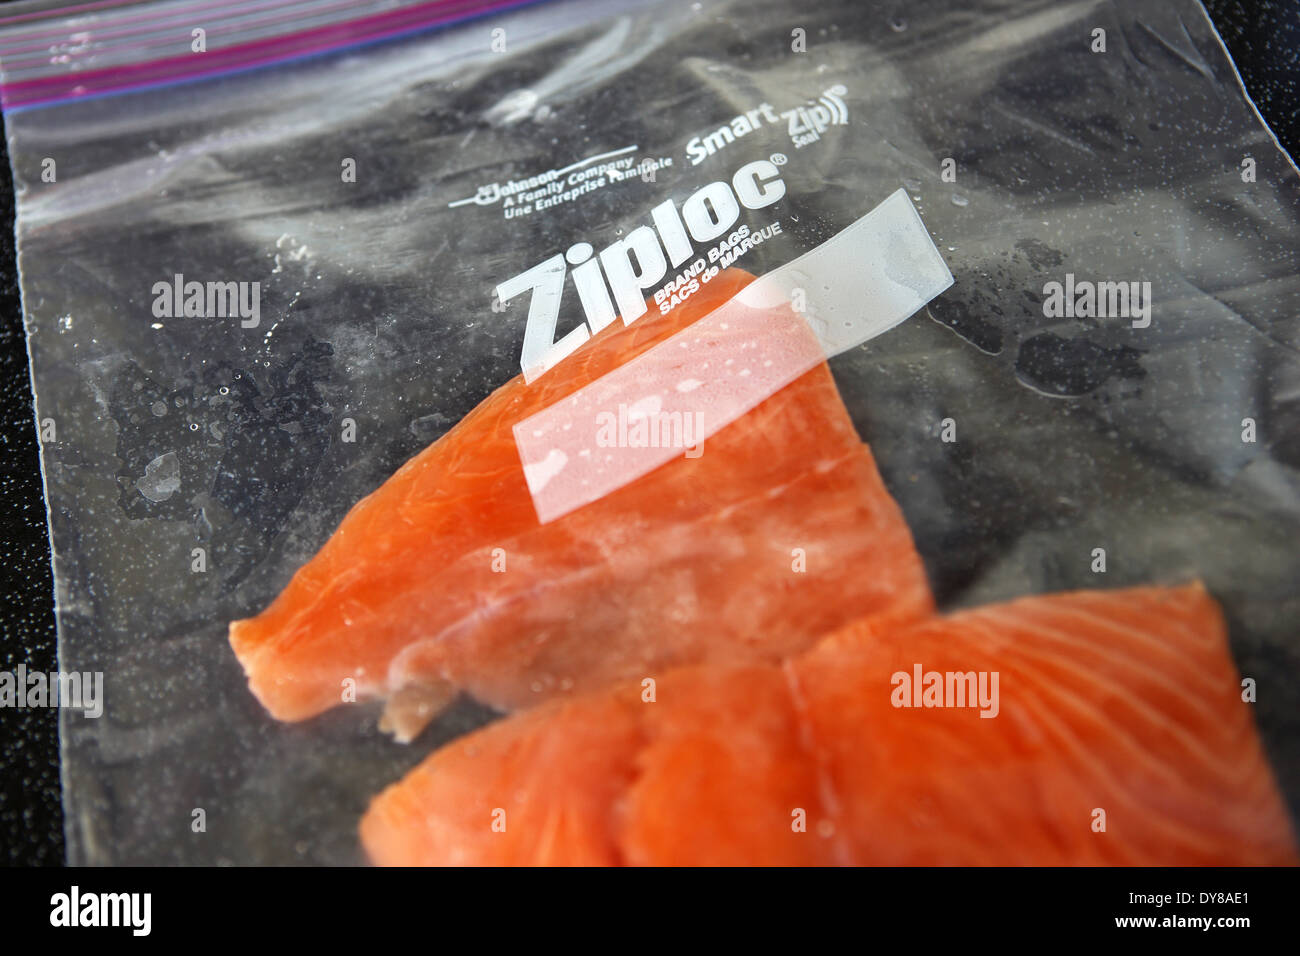 Ziploc bag containing salmon fillets ready for freezing Stock Photo - Alamy